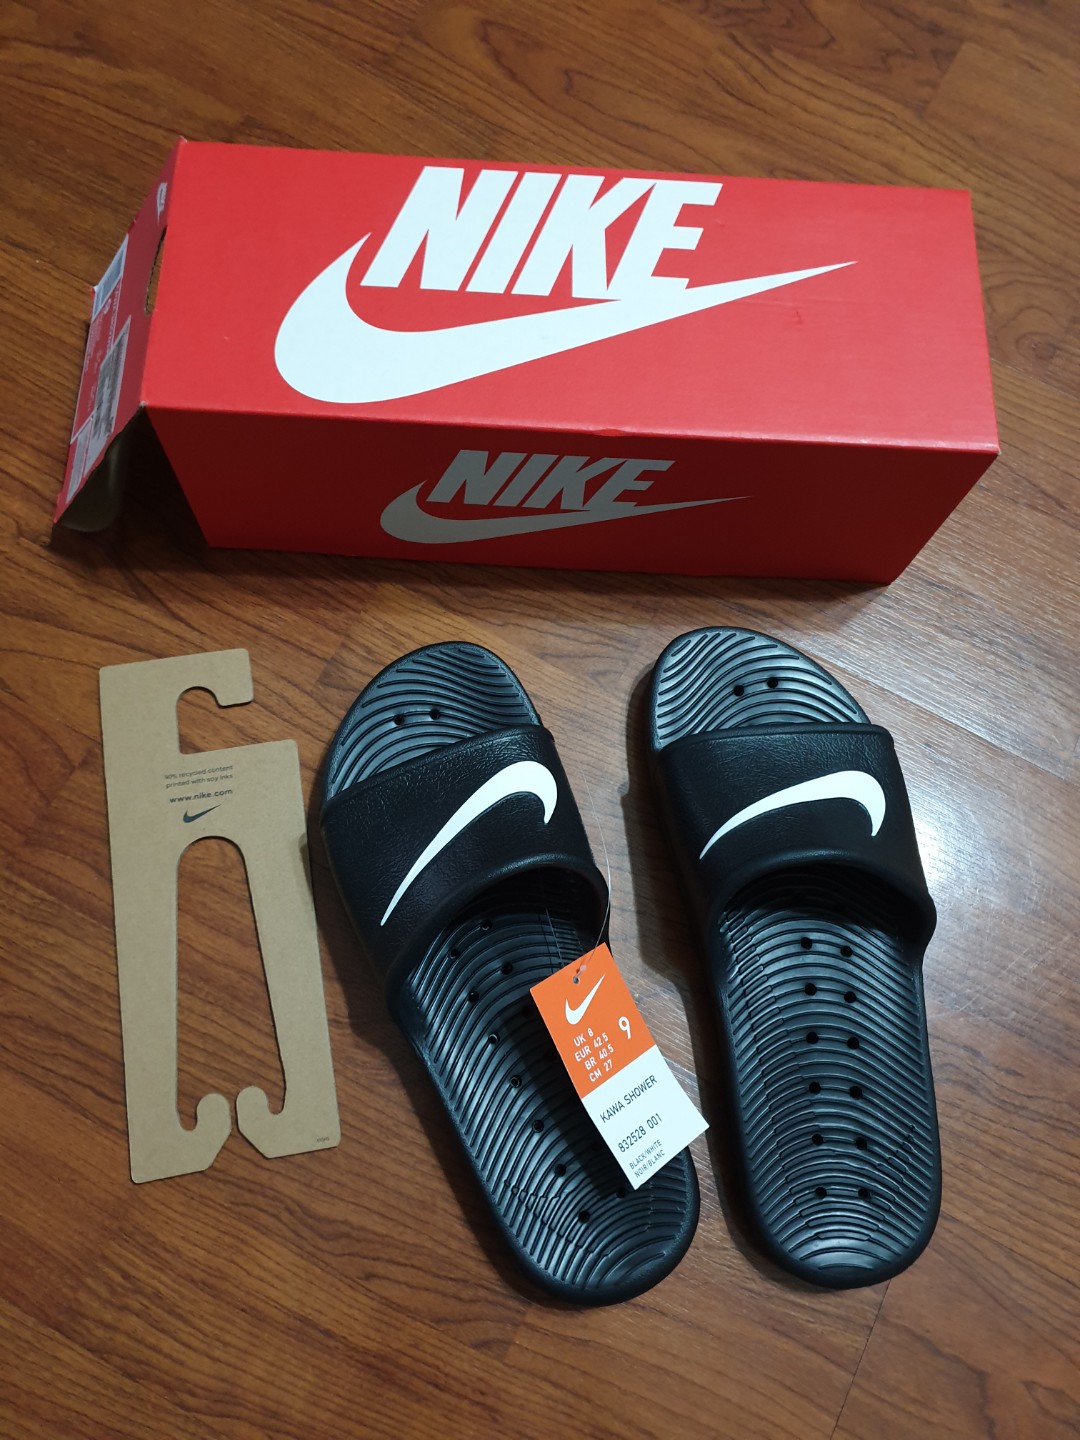 nike slippers size 9